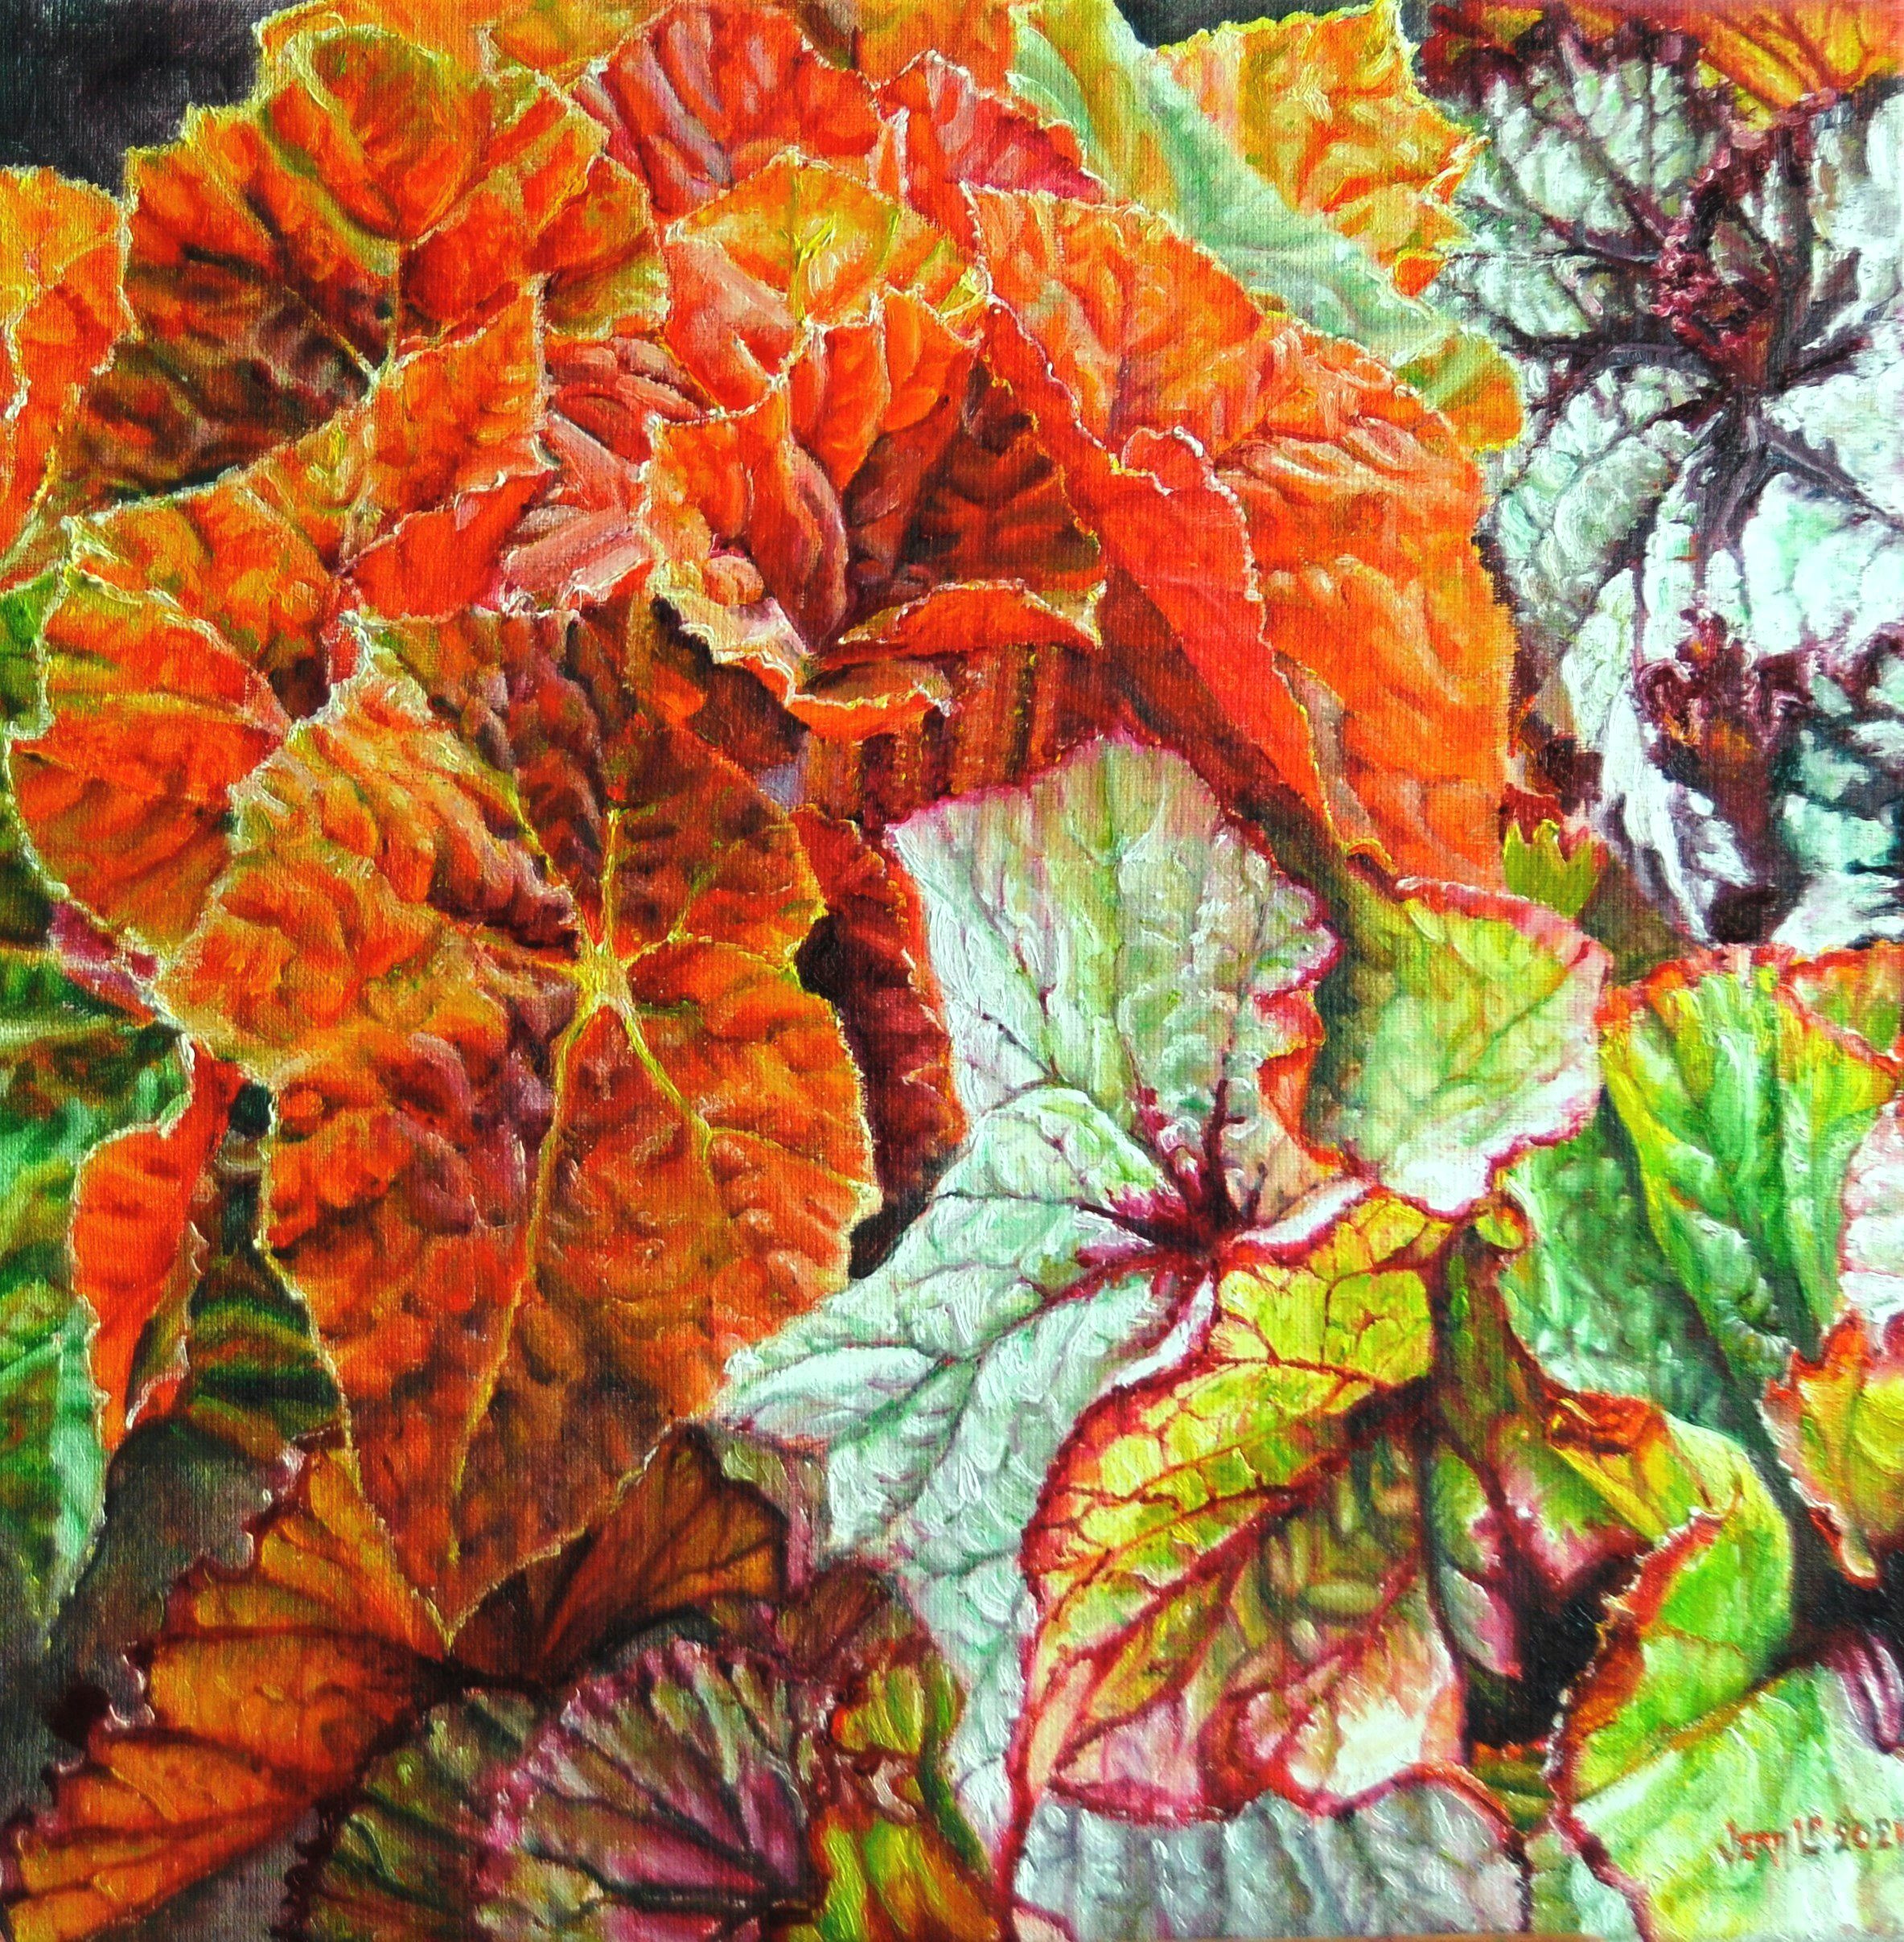 Begonias | Oil paint on linen | Year: 2021 | Dimensions: 40x40cm